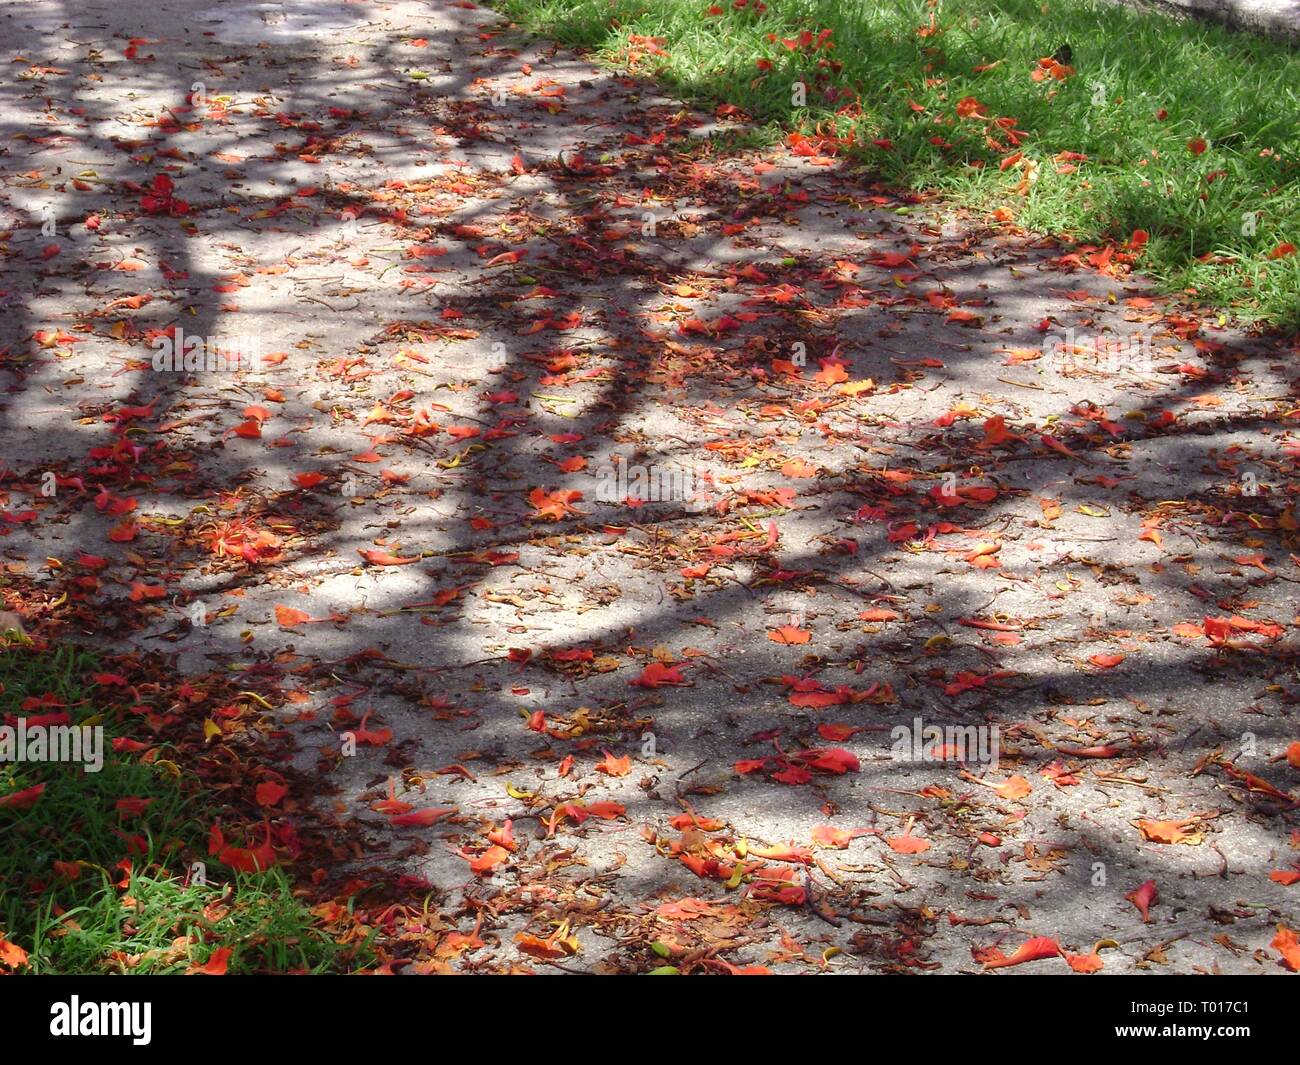 A concrete footpath made beautiful by a shower of bright red flowers fallen from the flame tree Stock Photo